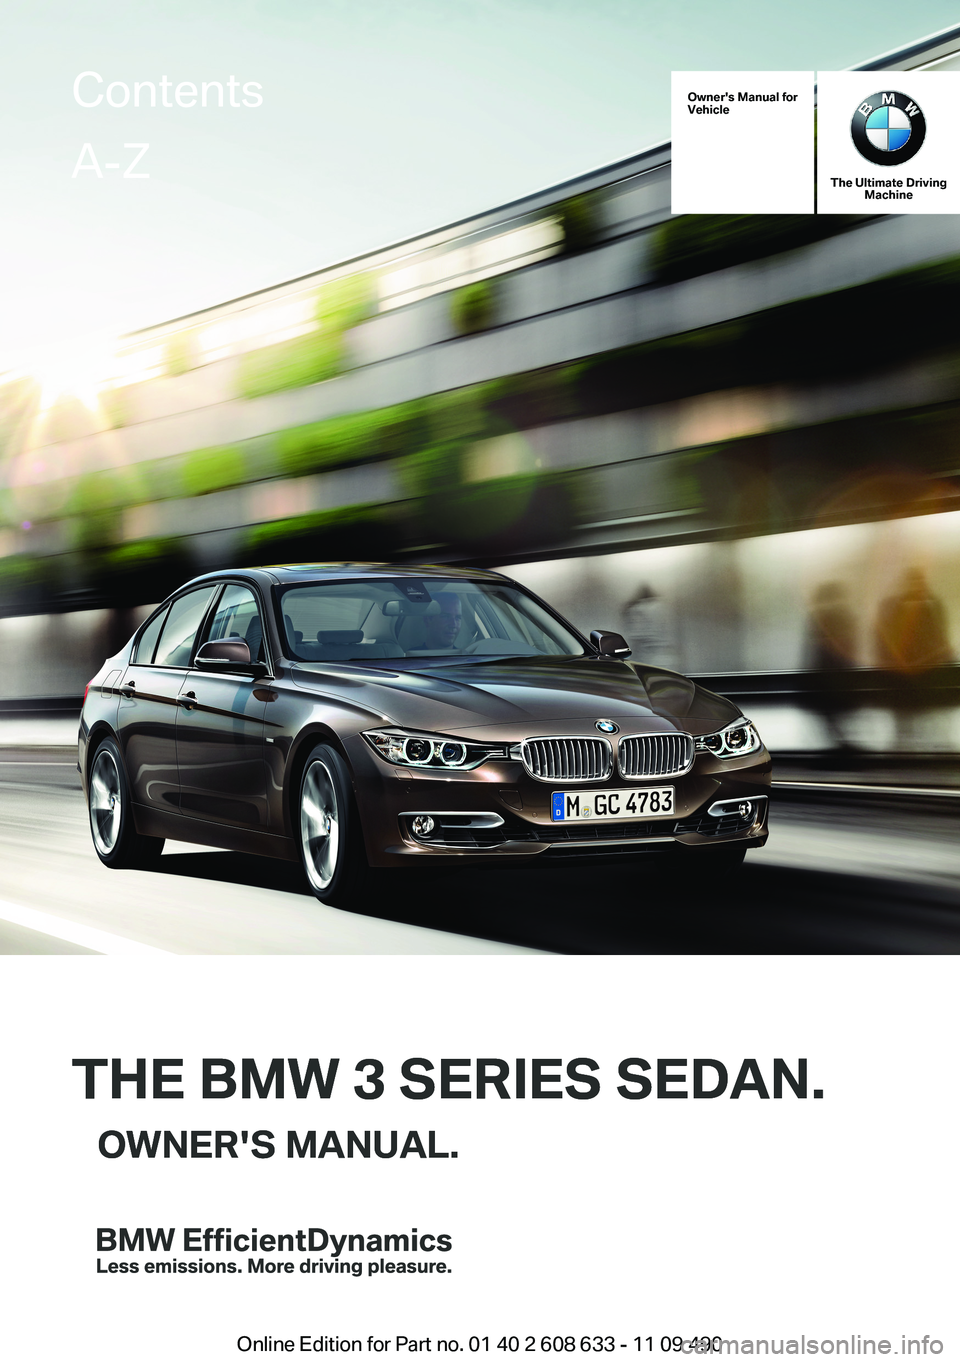 BMW 335I SEDAN 2012  Owners Manual Owner's Manual forVehicle
THE BMW 3 SERIES SEDAN.OWNER'S MANUAL.
The Ultimate DrivingMachine
THE BMW 3 SERIES SEDAN.OWNER'S MANUAL.
ContentsA-Z
Online Edition for Part no. 01 40 2 608 633 